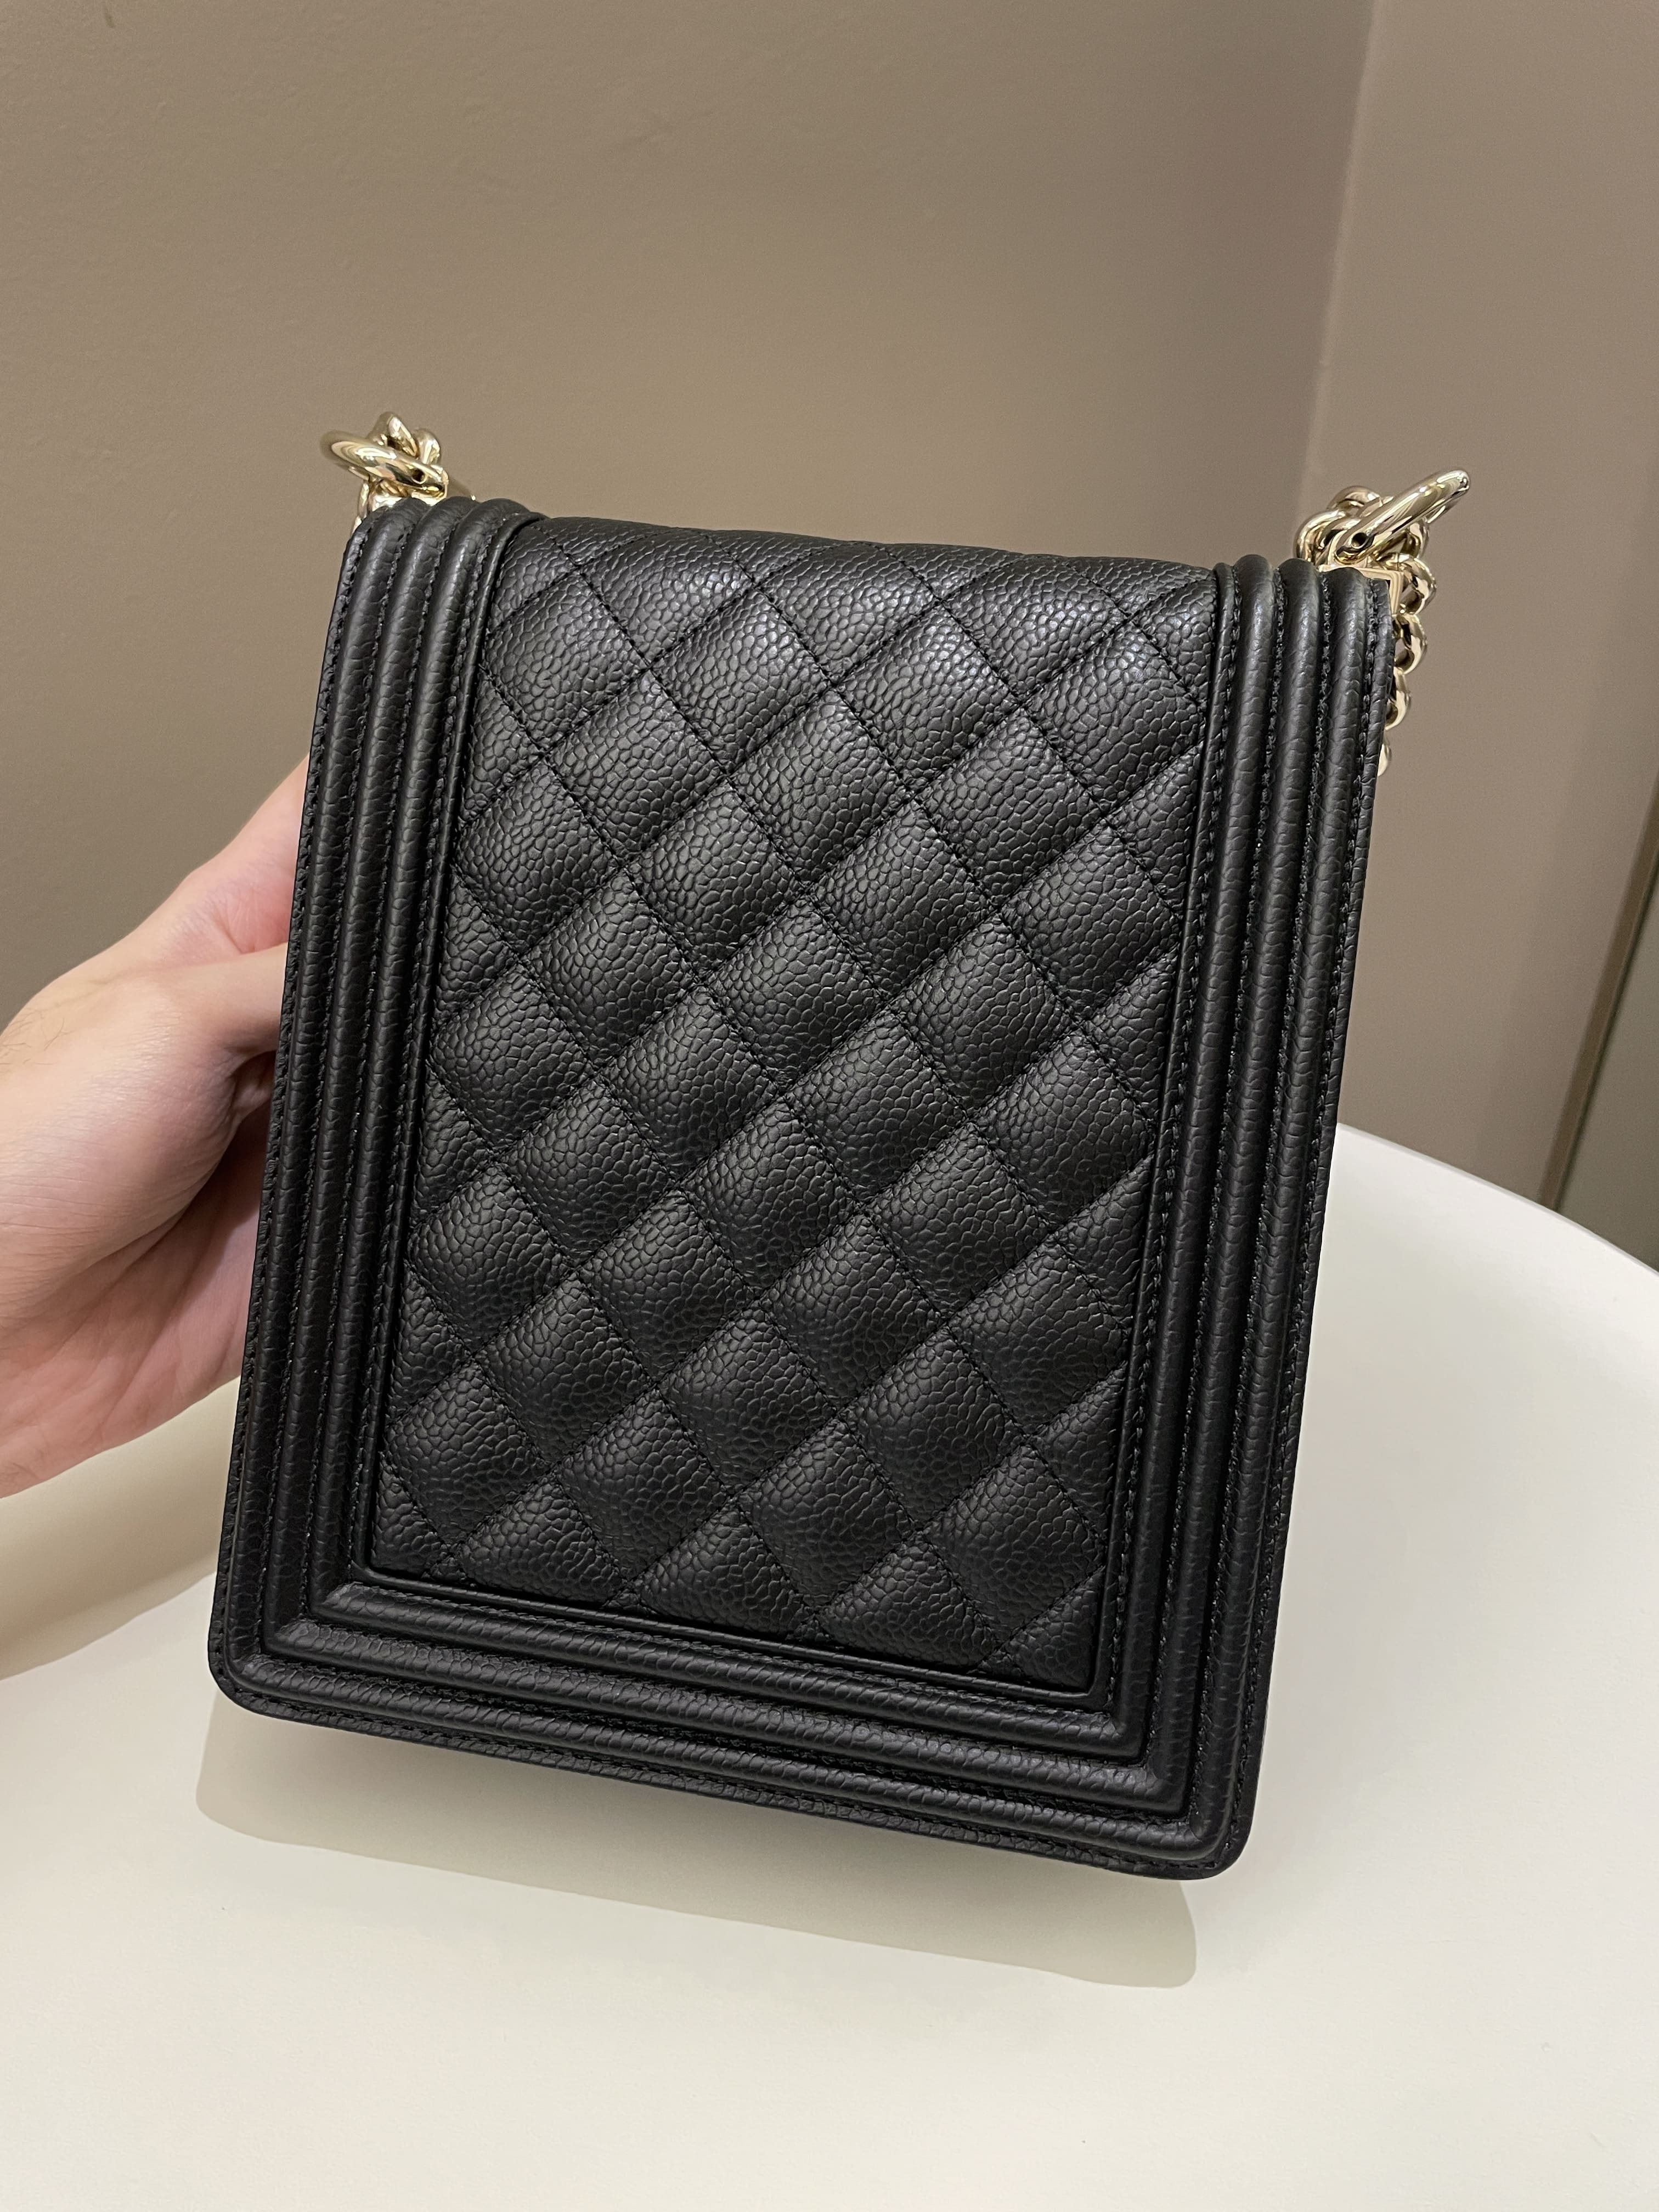 Chanel Quilted North South Boy Black Caviar